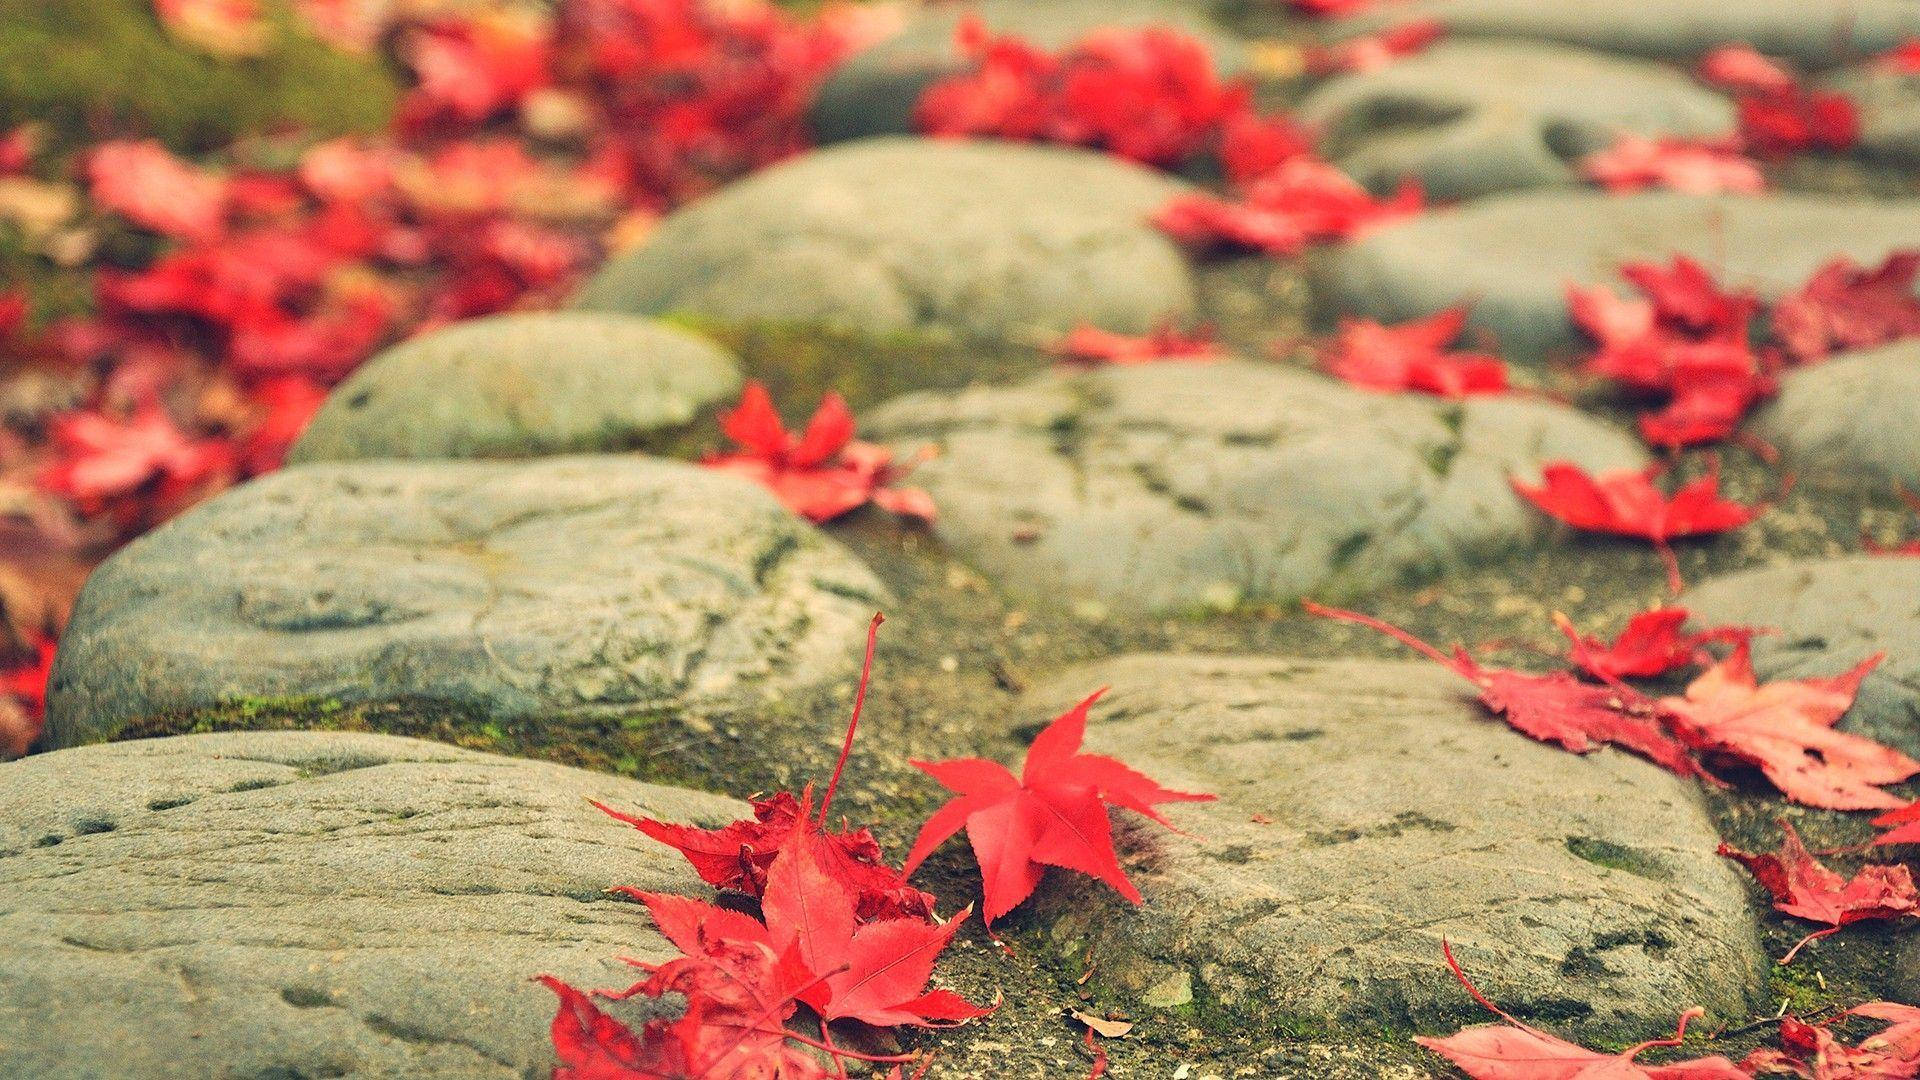 1080p Hd Maple Leaves On Cobble Stone Path